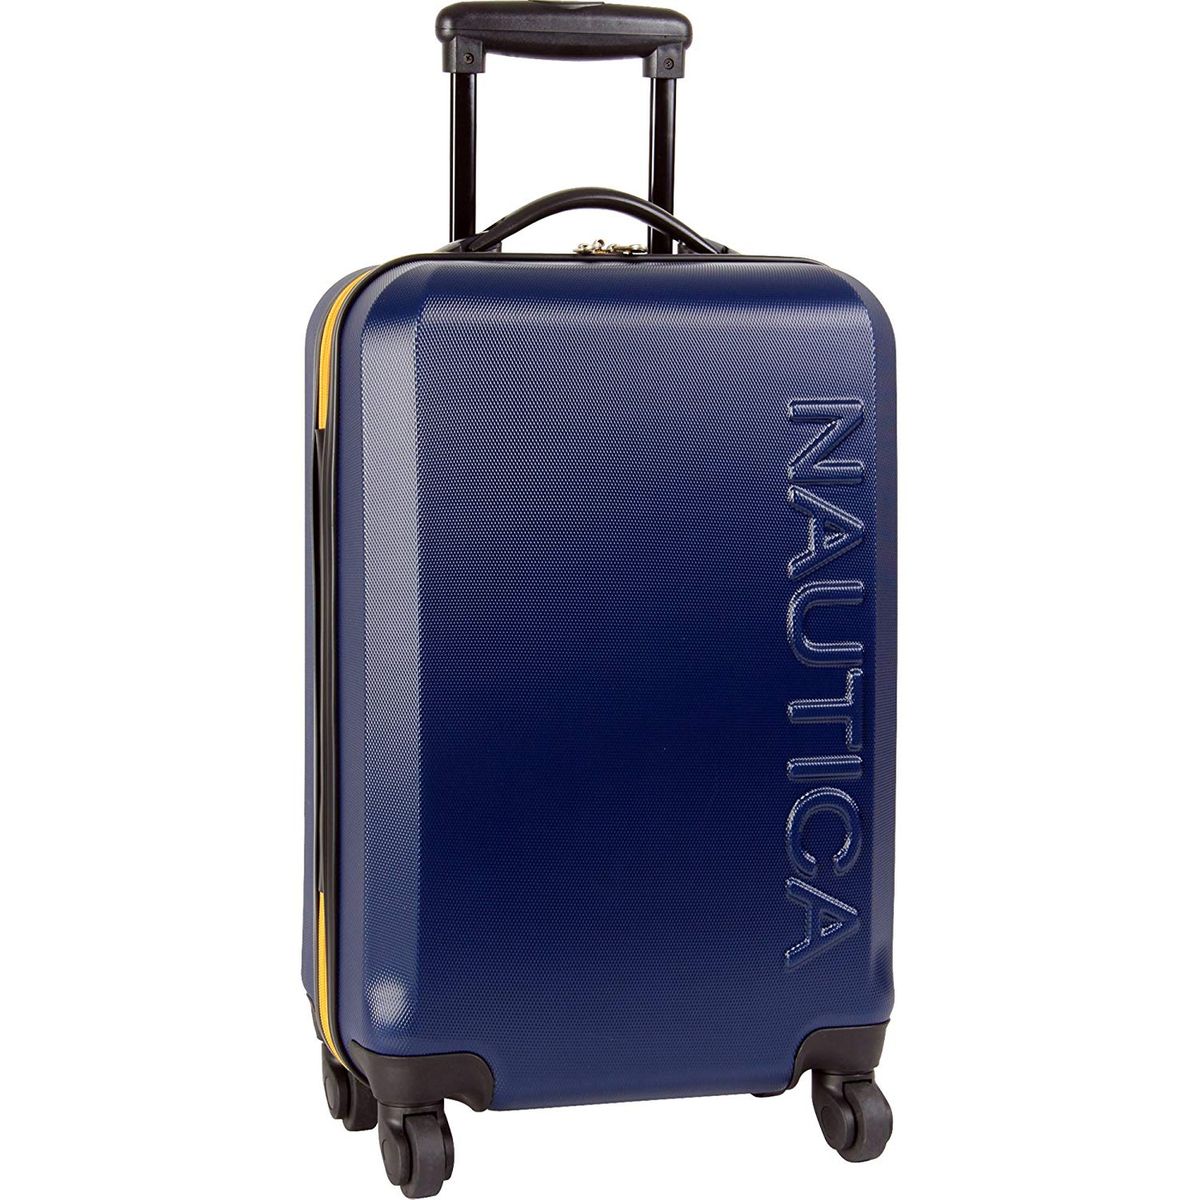 most durable luggage brands